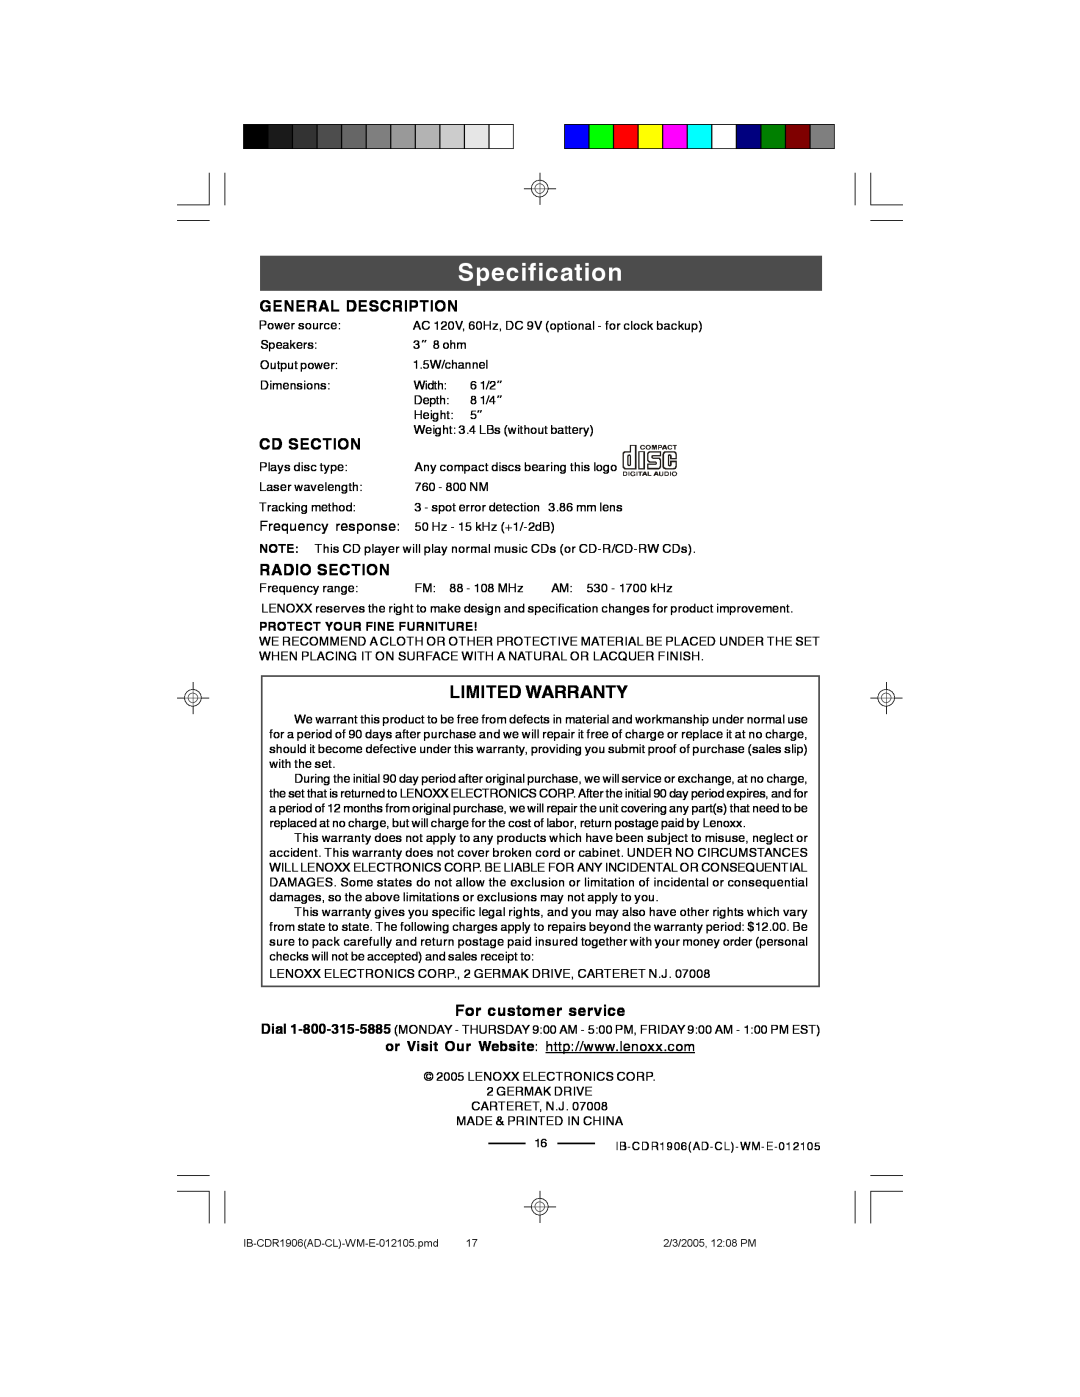 Lenoxx Electronics CDR1906 manual Specification, General Description, Cd Section, Radio Section, For customer service 